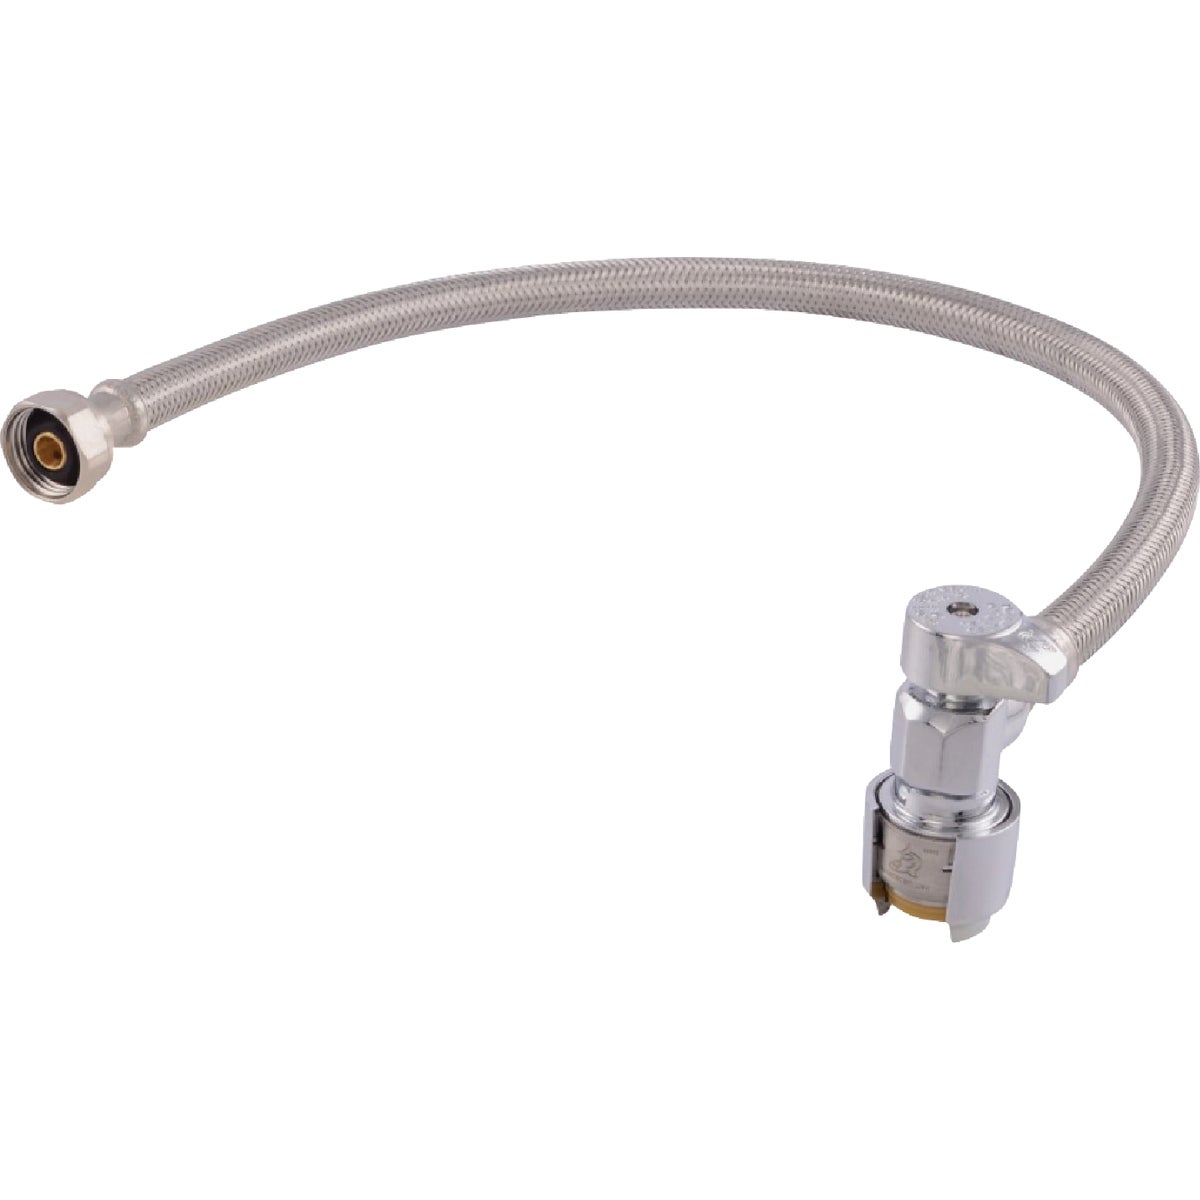 Item 411162, The SharkBite faucet connector combines a 1/2 In.